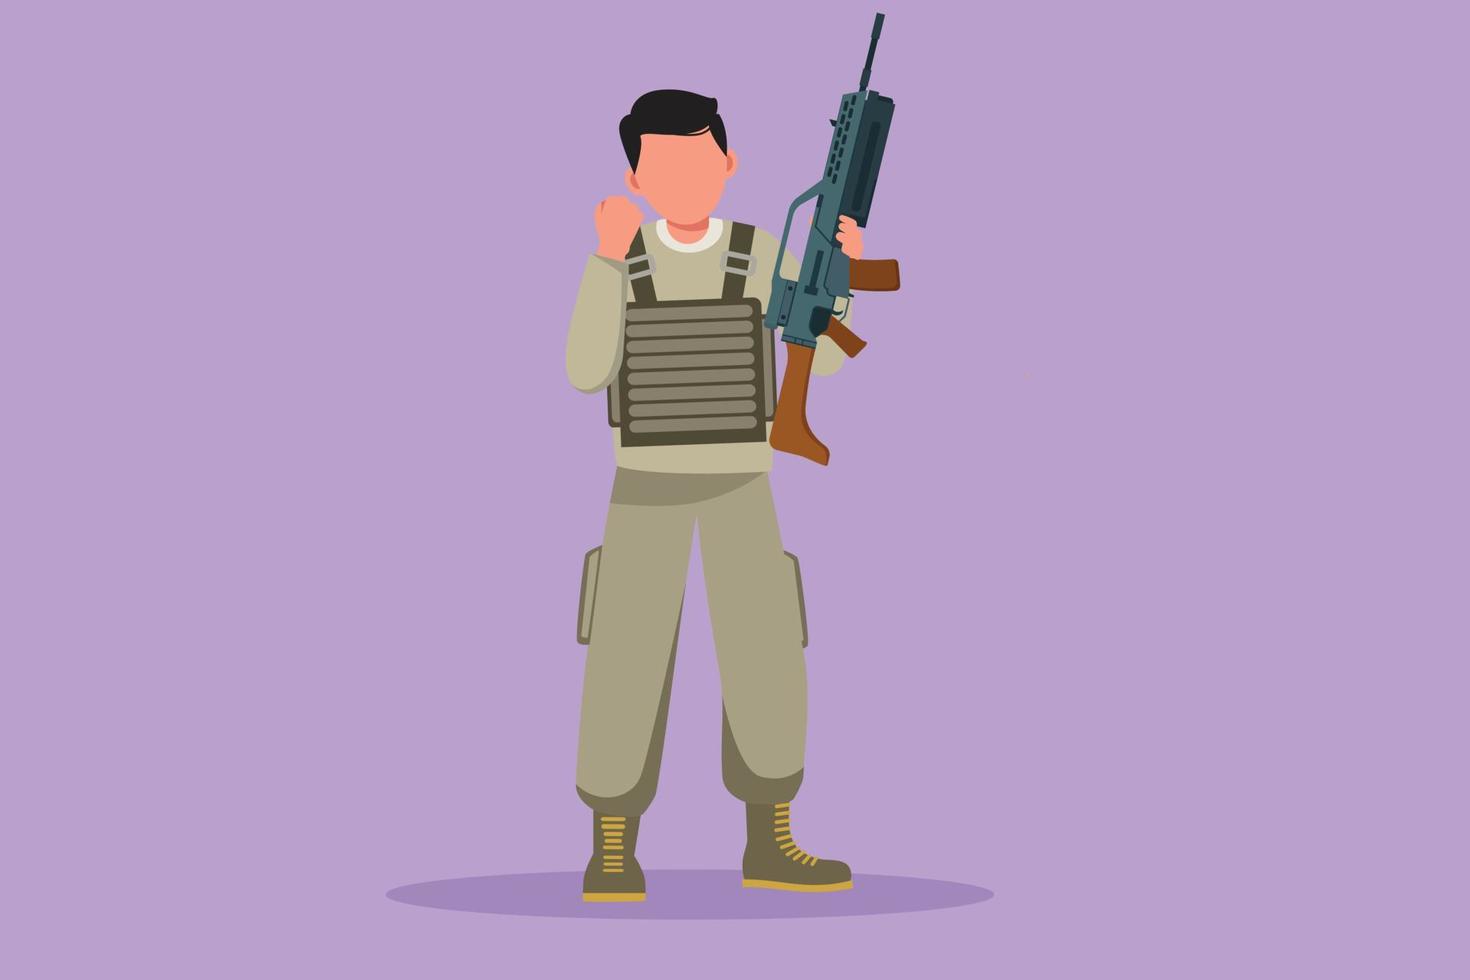 Graphic flat design drawing of happy male soldiers or army standing with weapon, full uniform, and celebrate gesture serving country with strength of military forces. Cartoon style vector illustration